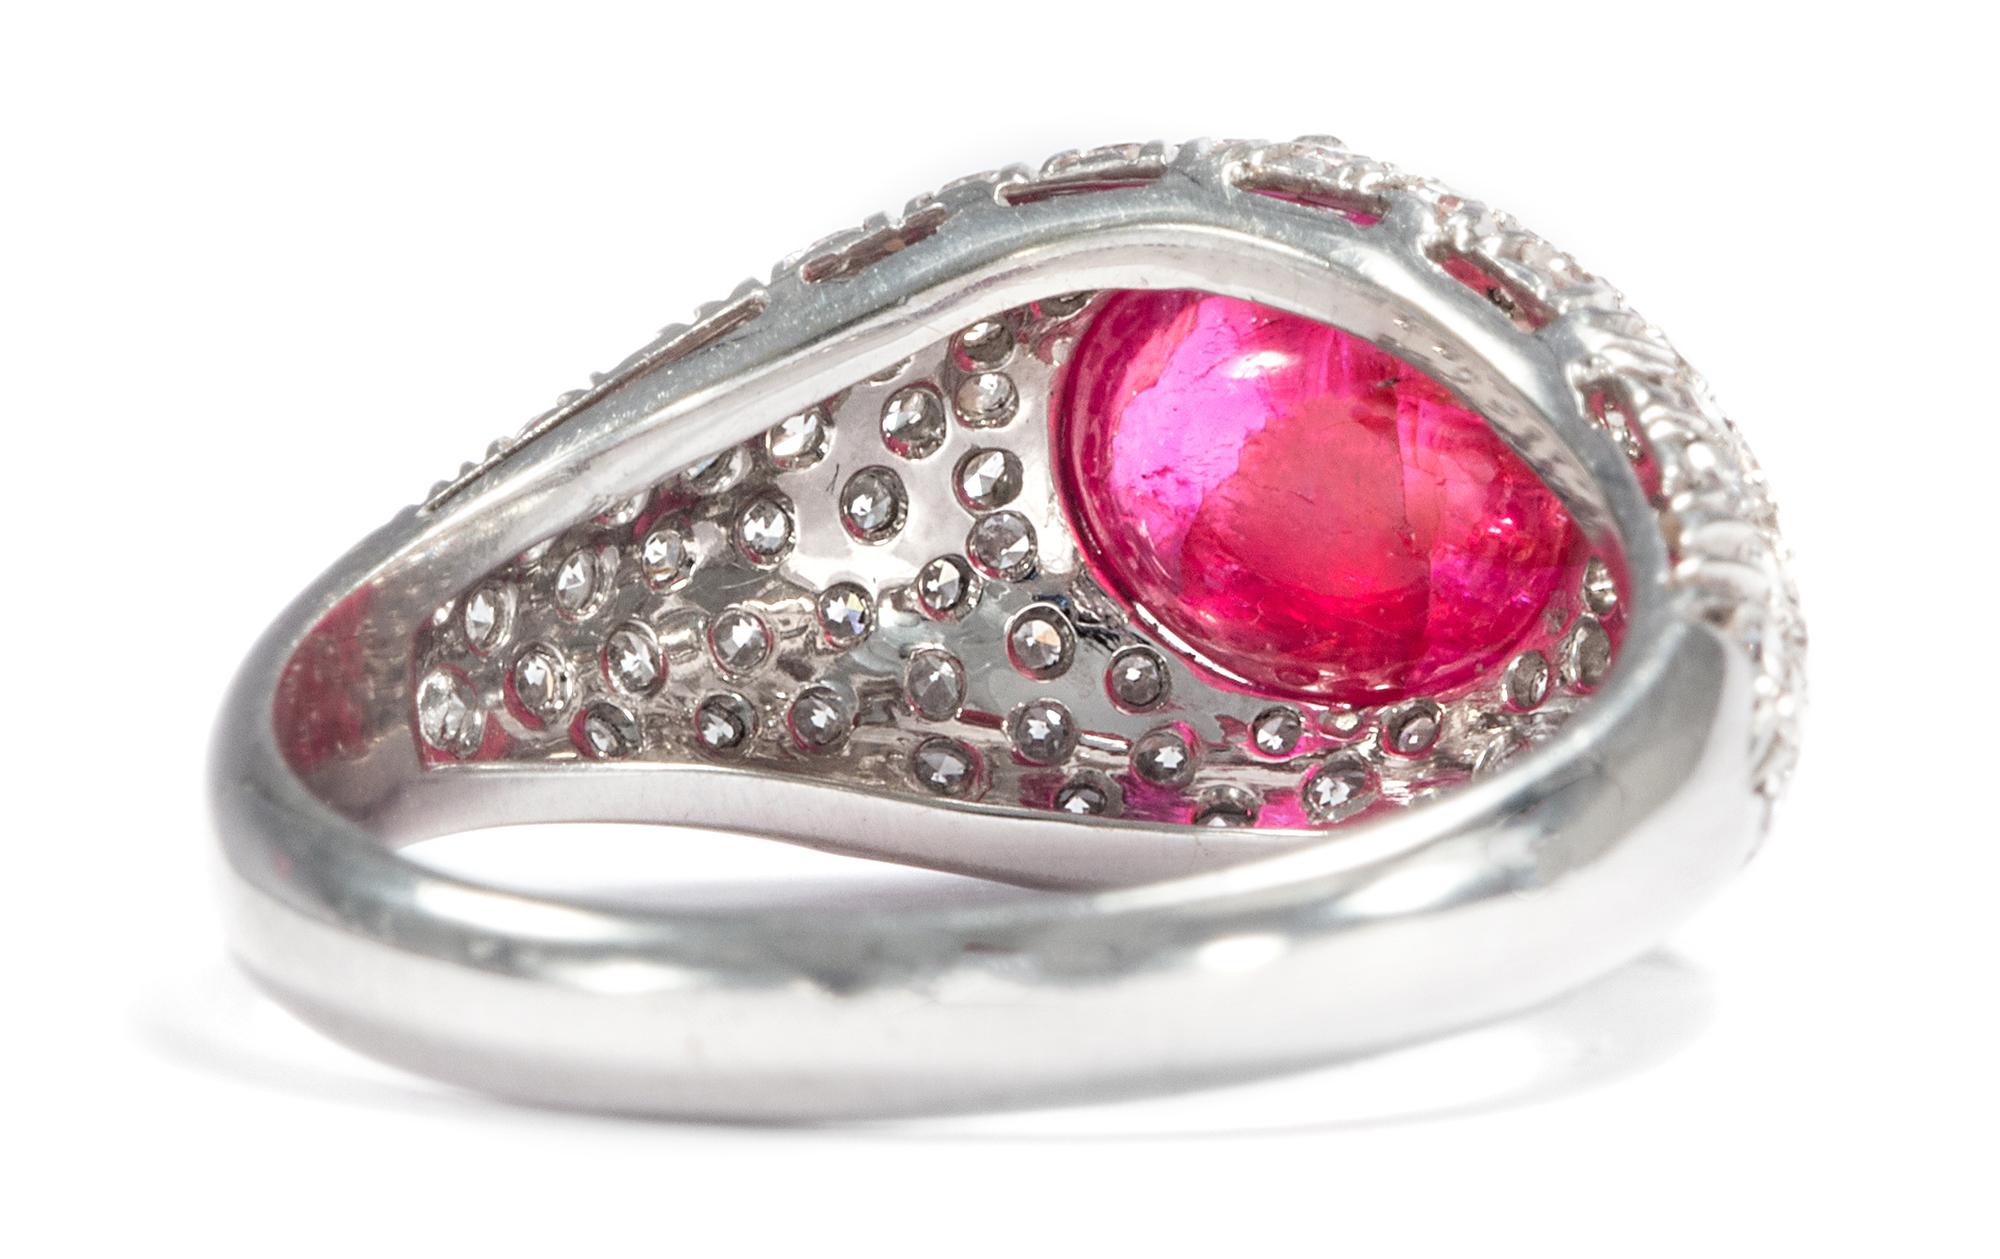 Retro Vintage 1990s Certified Untreated 3.2 Carat Ruby Diamond Gold Cocktail Ring For Sale